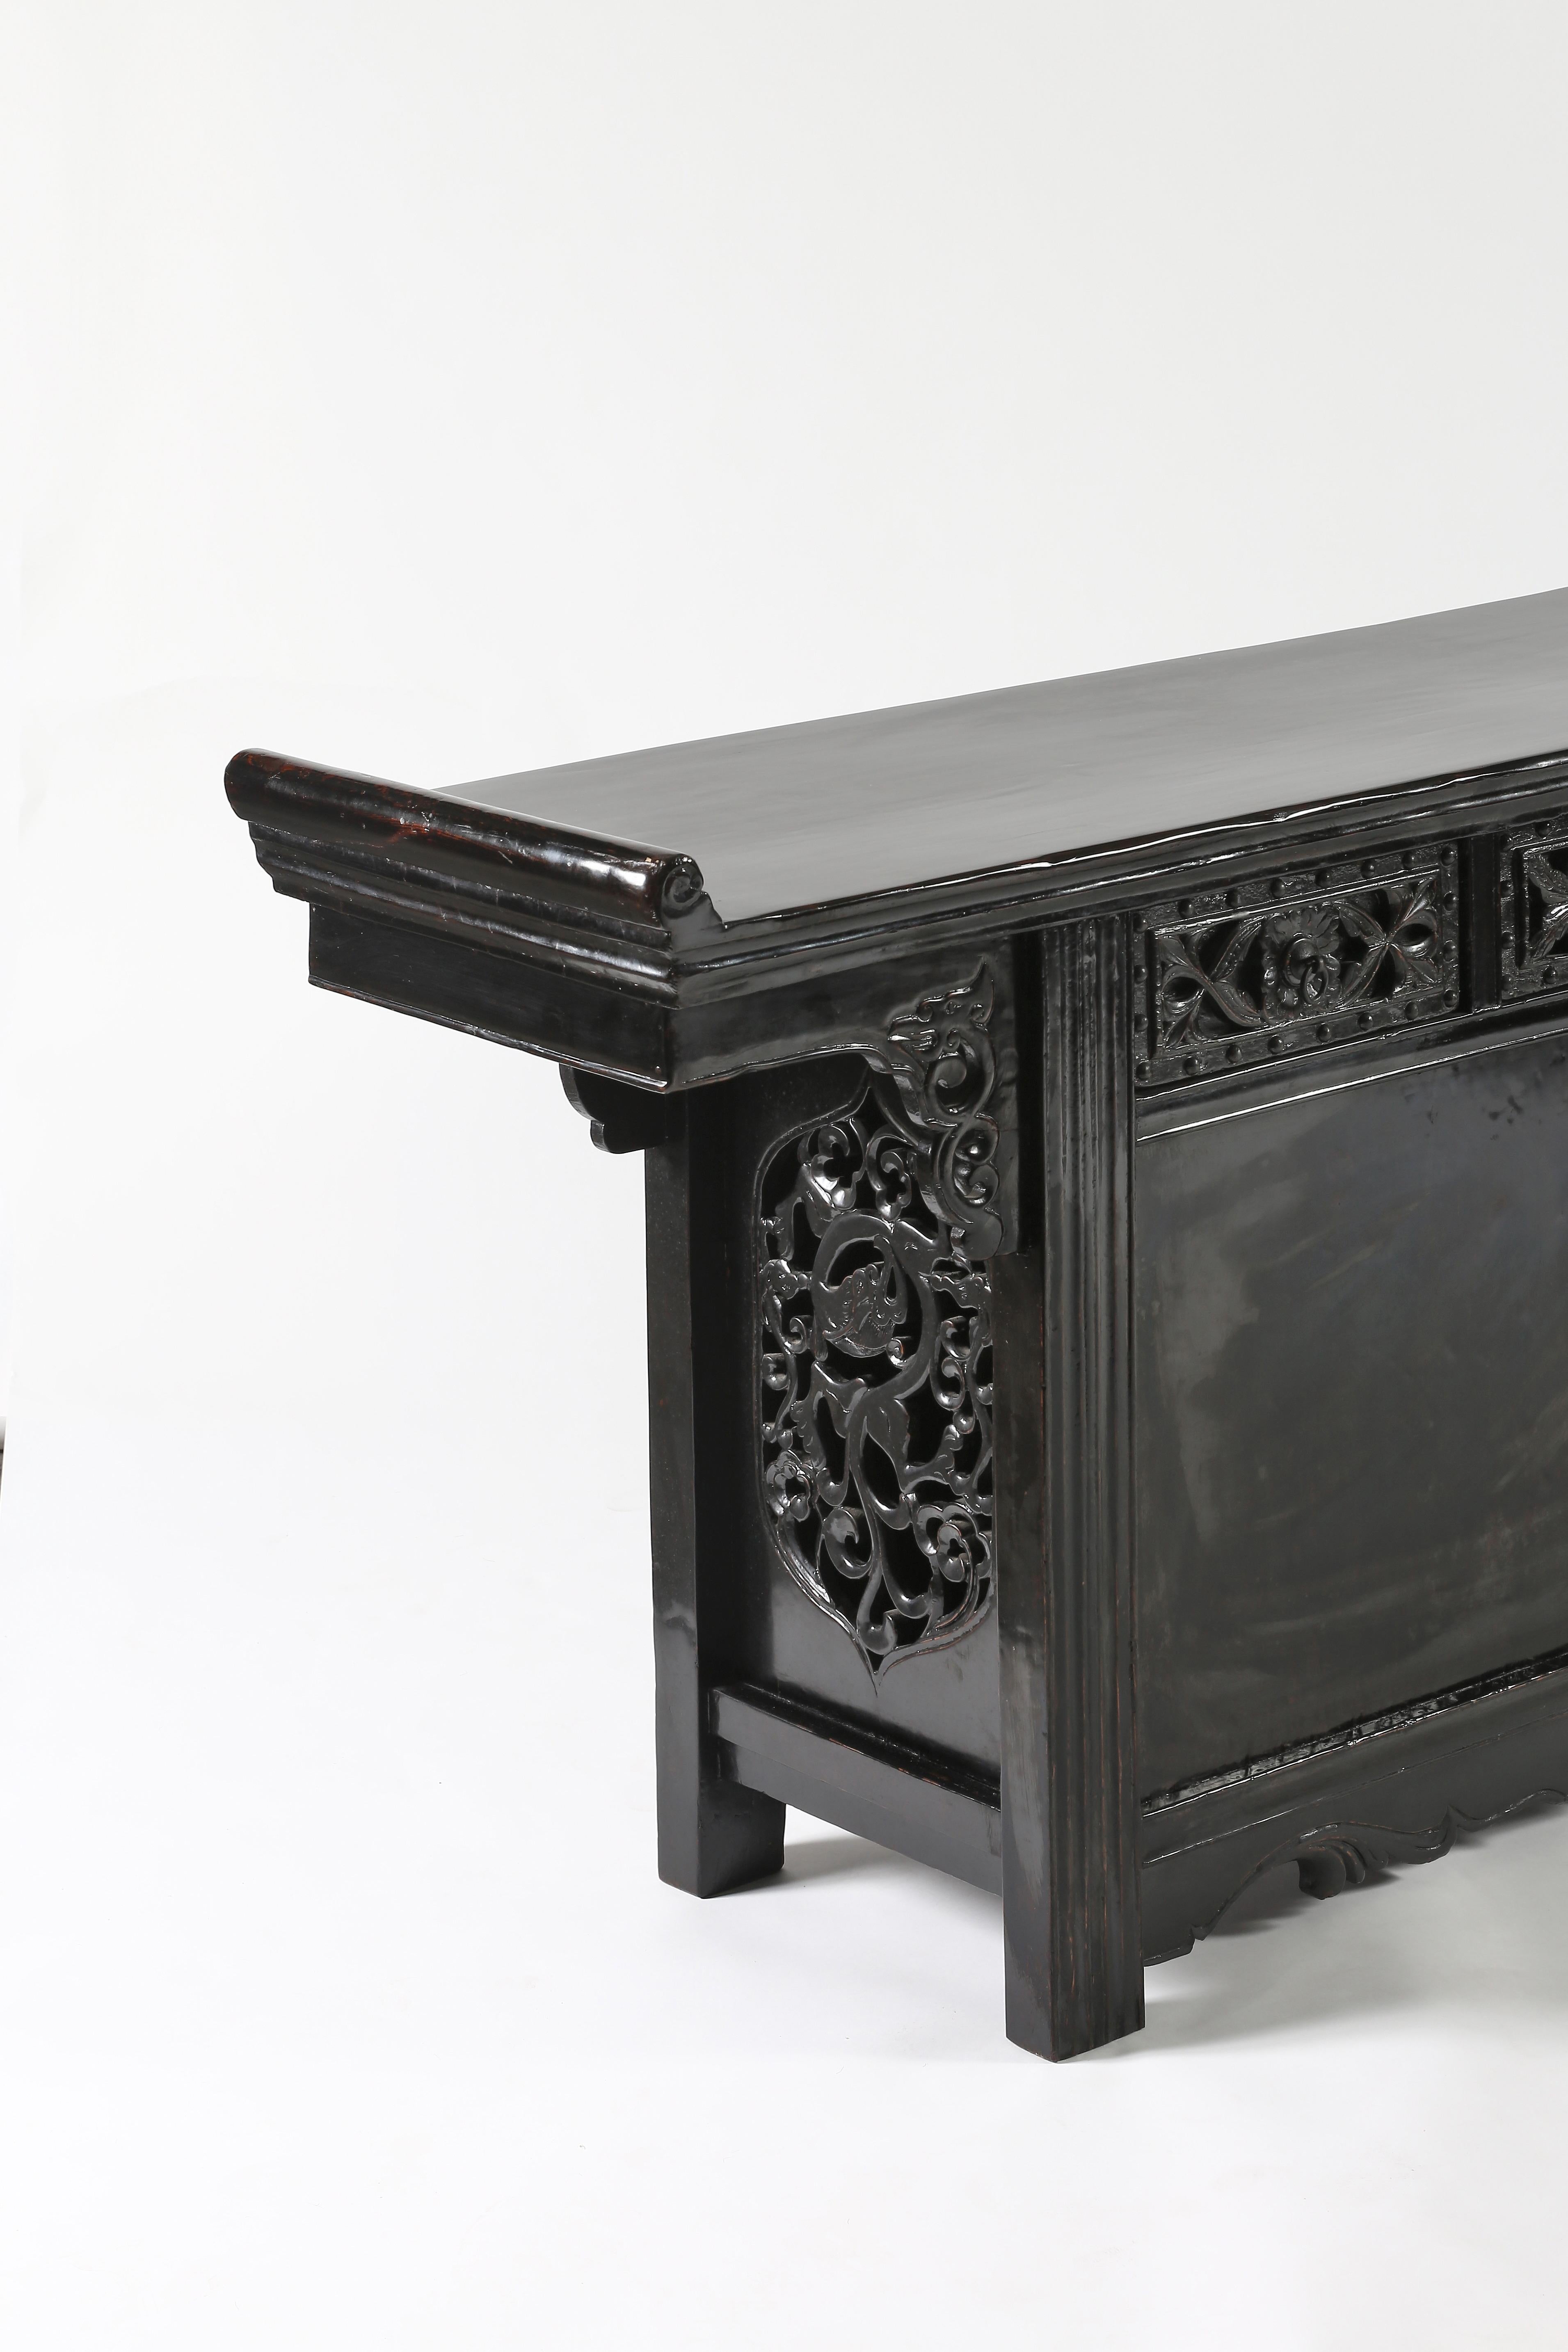 The superb altar coffer with a floating panel top, inserted within the rectangular frame ending with everyted flanges, five drawers decorated with relief carved floral and foliage carving and iron studds, above two doors opening to an open storage